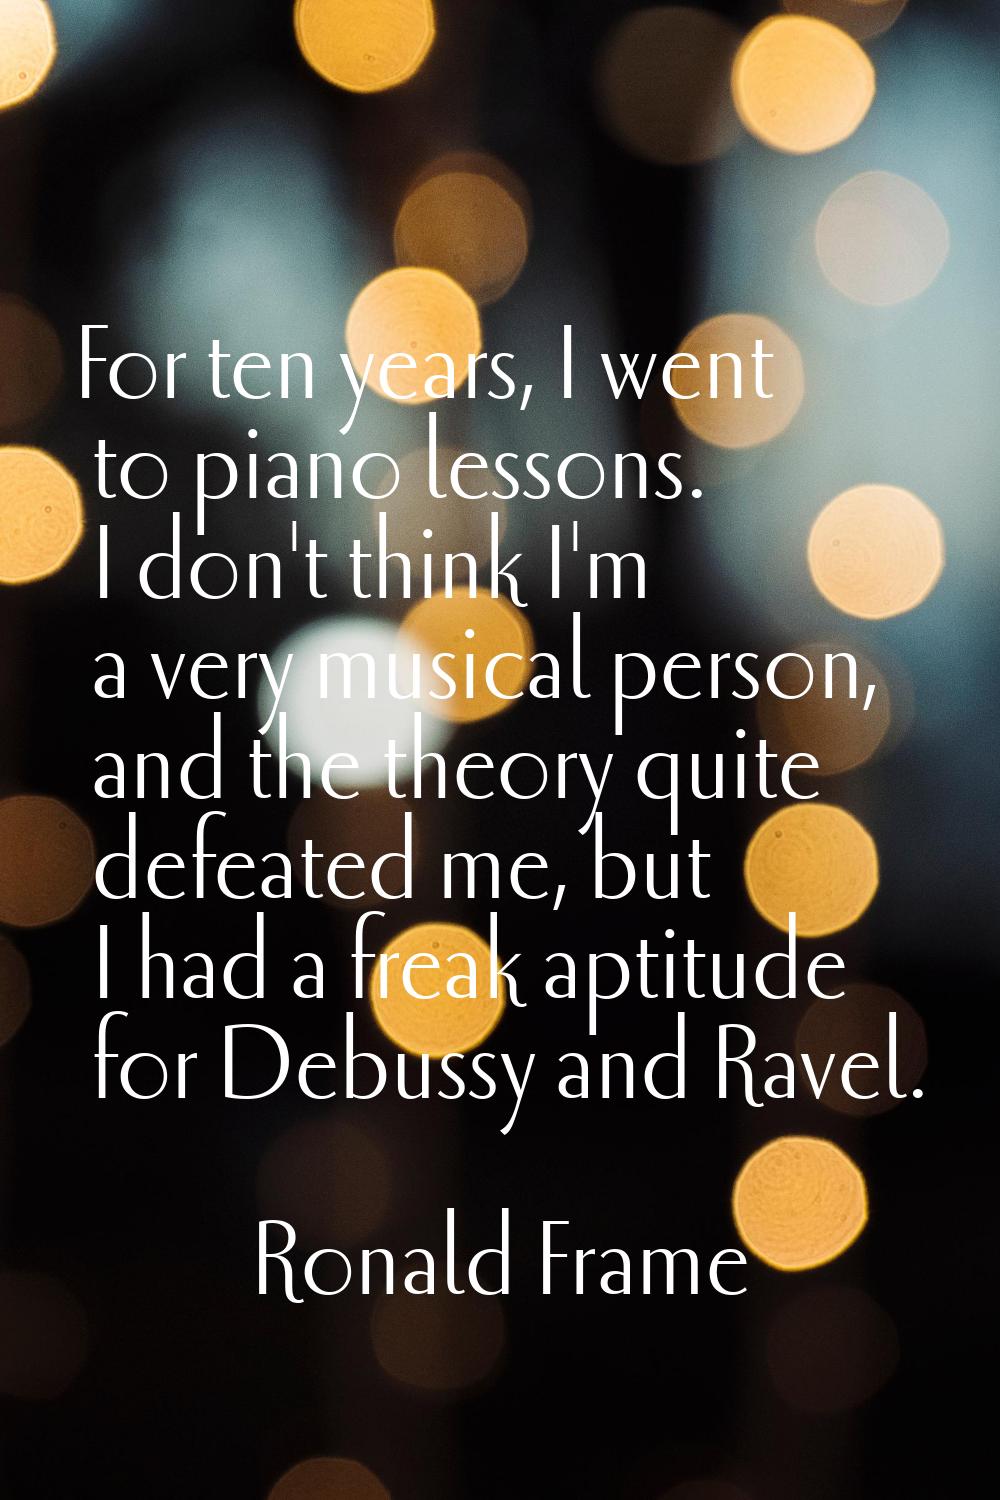 For ten years, I went to piano lessons. I don't think I'm a very musical person, and the theory qui